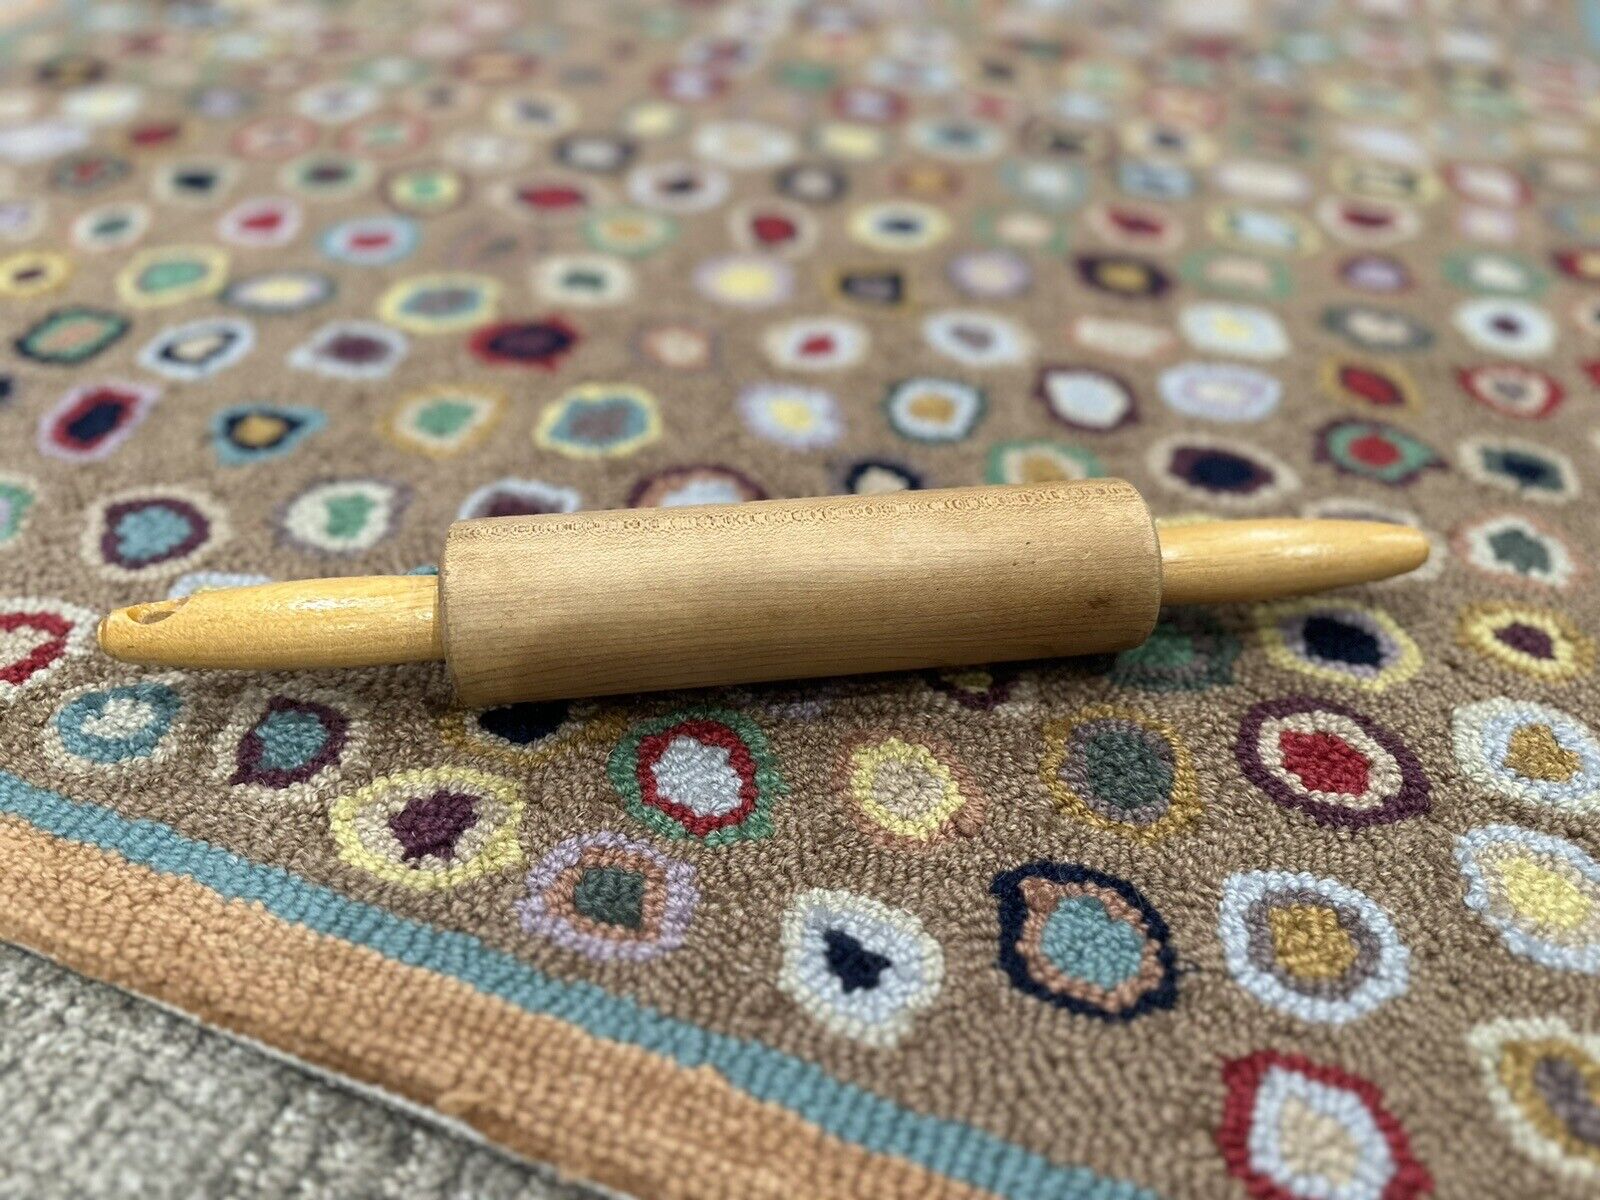 VINTAGE WOODEN ROLLING PIN CHILD'S SMALL 7